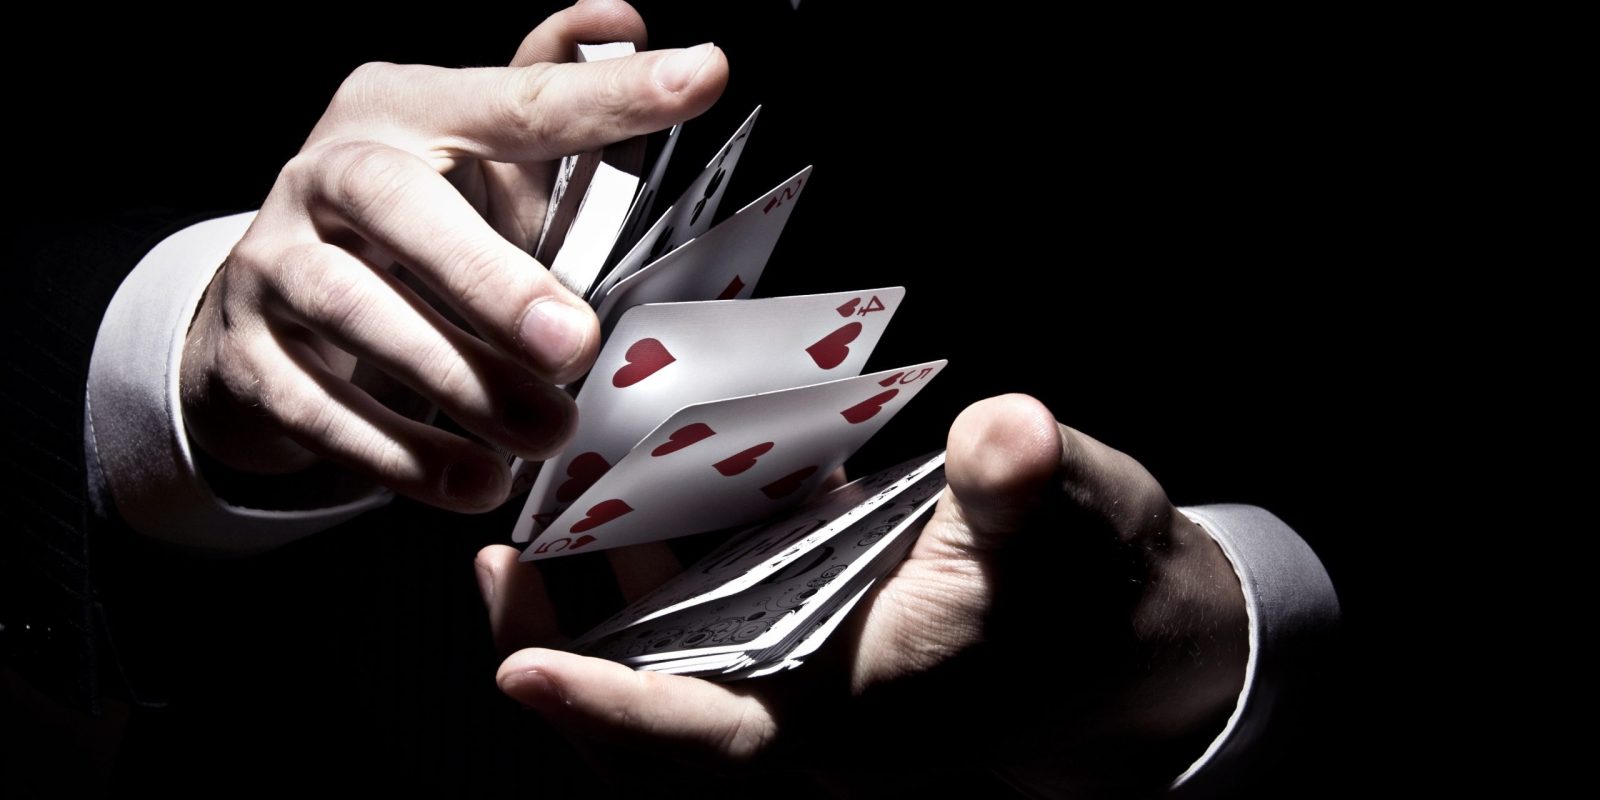 A magician shuffling the cards in a cool way under the spotlight